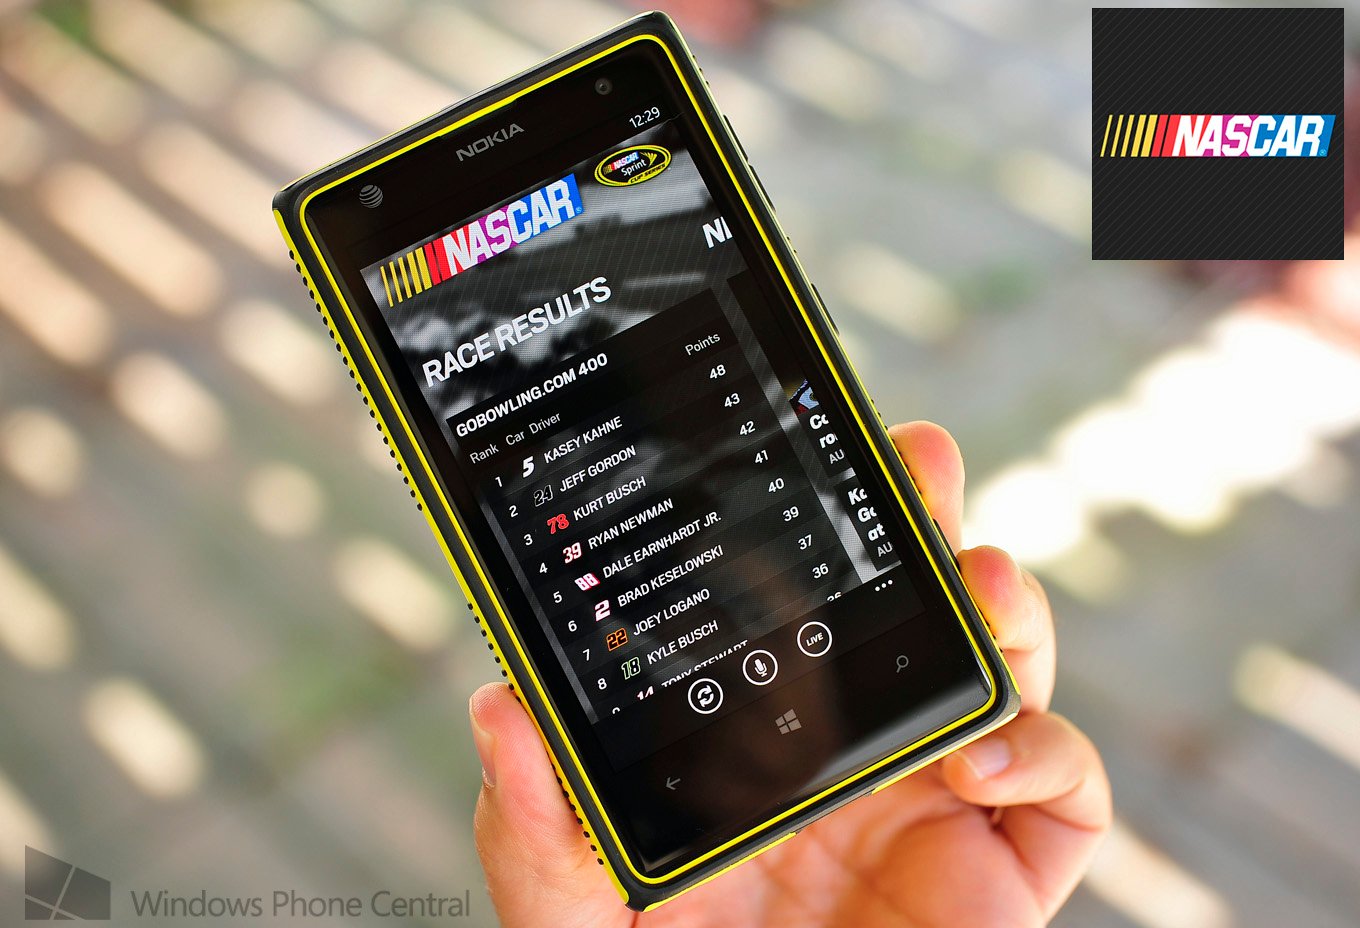 Start your engines, official NASCAR Mobile 13 now available for all Windows Phone 8 devices (but Sprint gets the perks) Windows Central